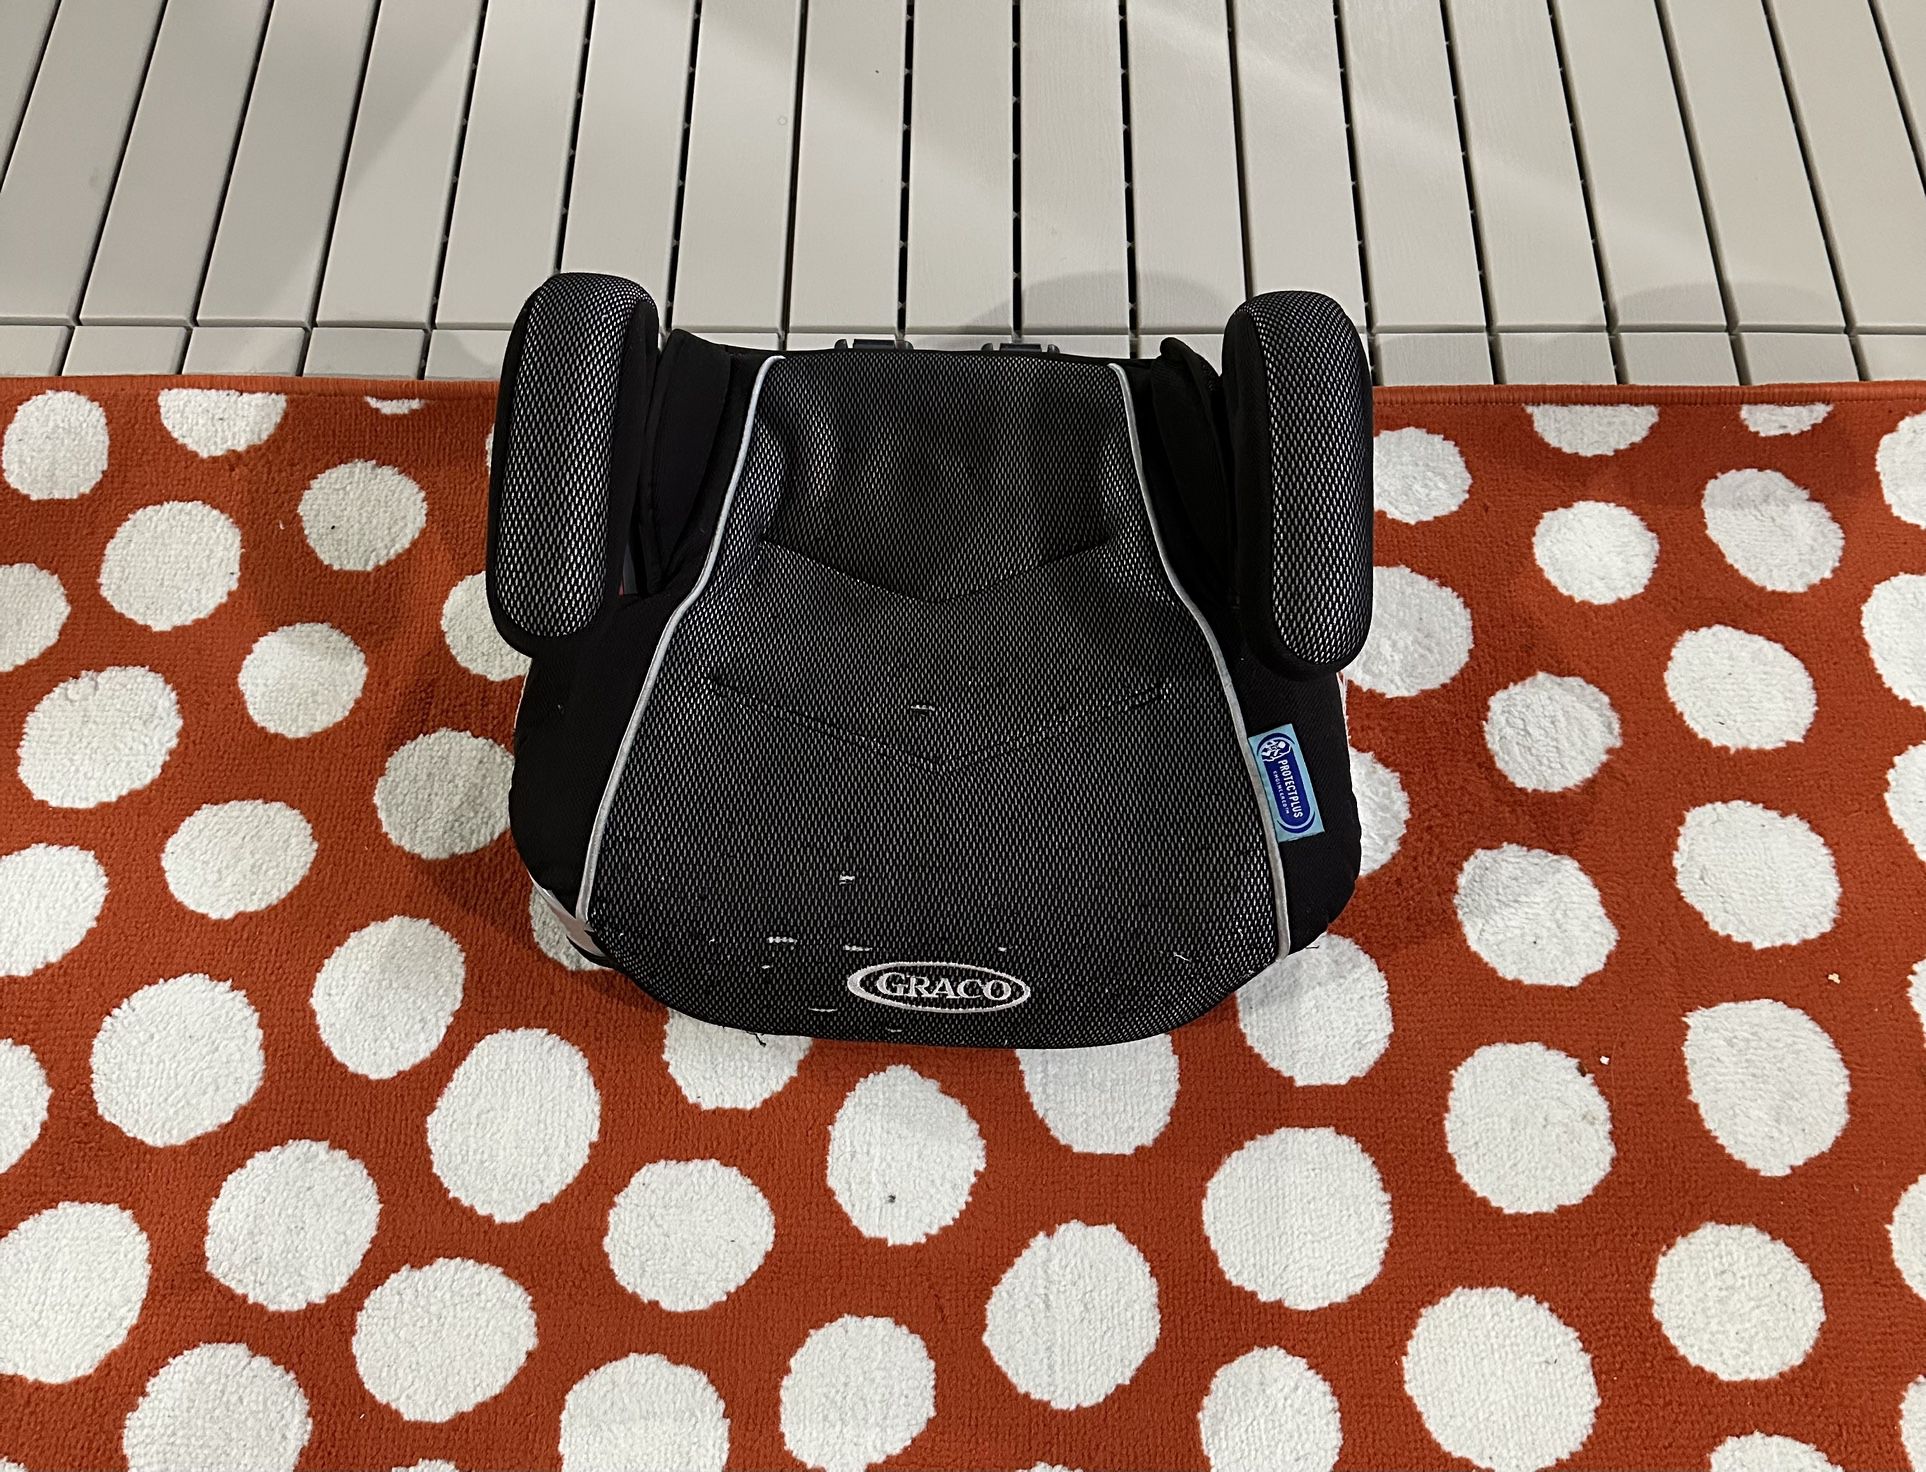 Graco Booster Seat For Sale 